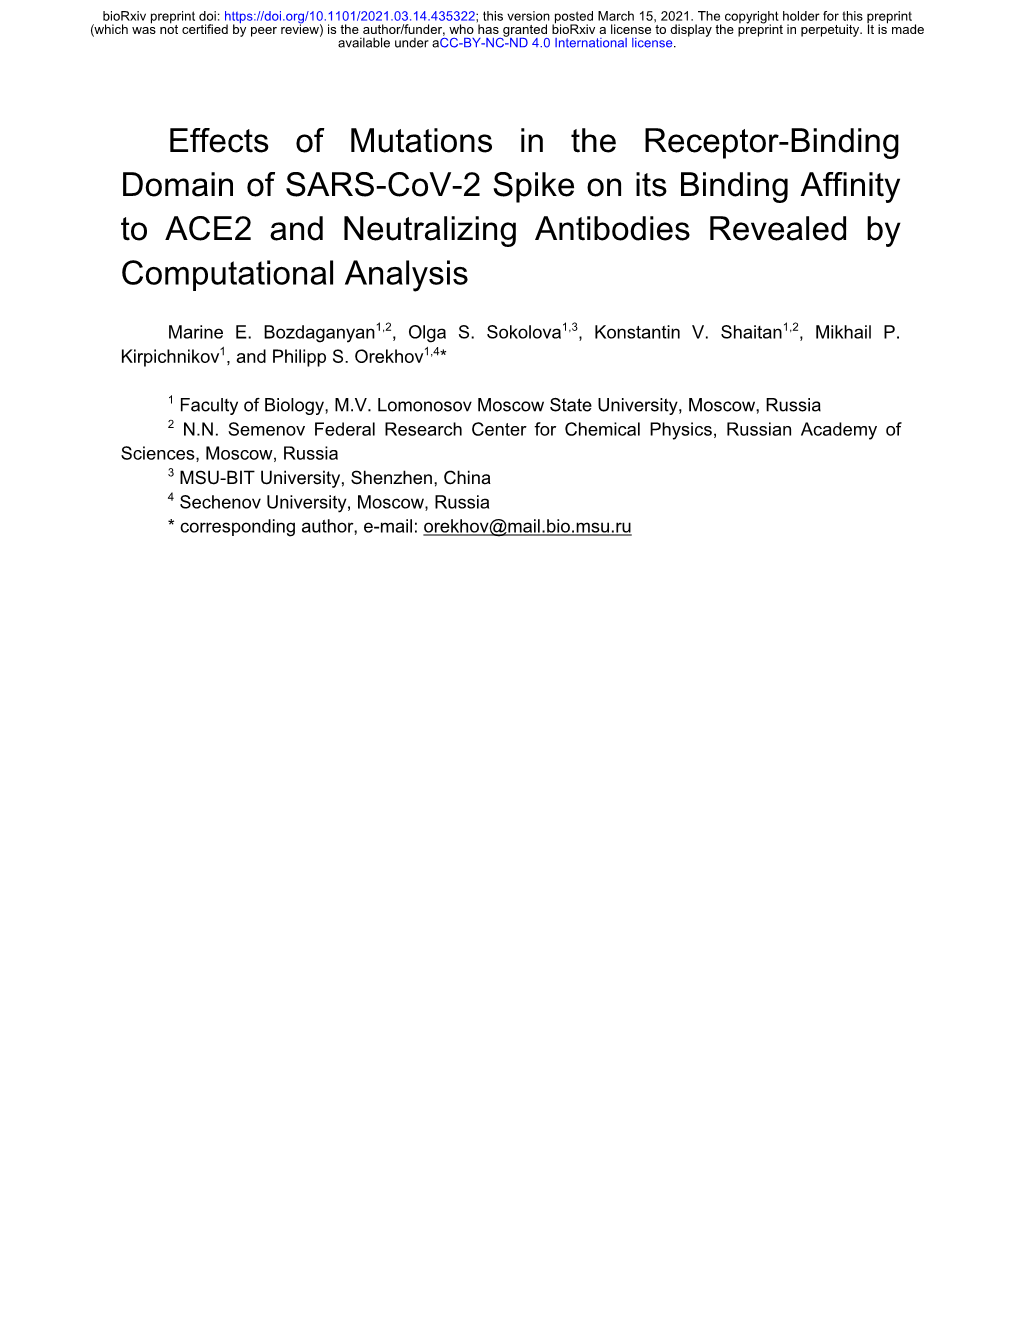 Effects of Mutations in the Receptor-Binding Domain of SARS-Cov-2 Spike on Its Binding Affinity to ACE2 and Neutralizing Antibod